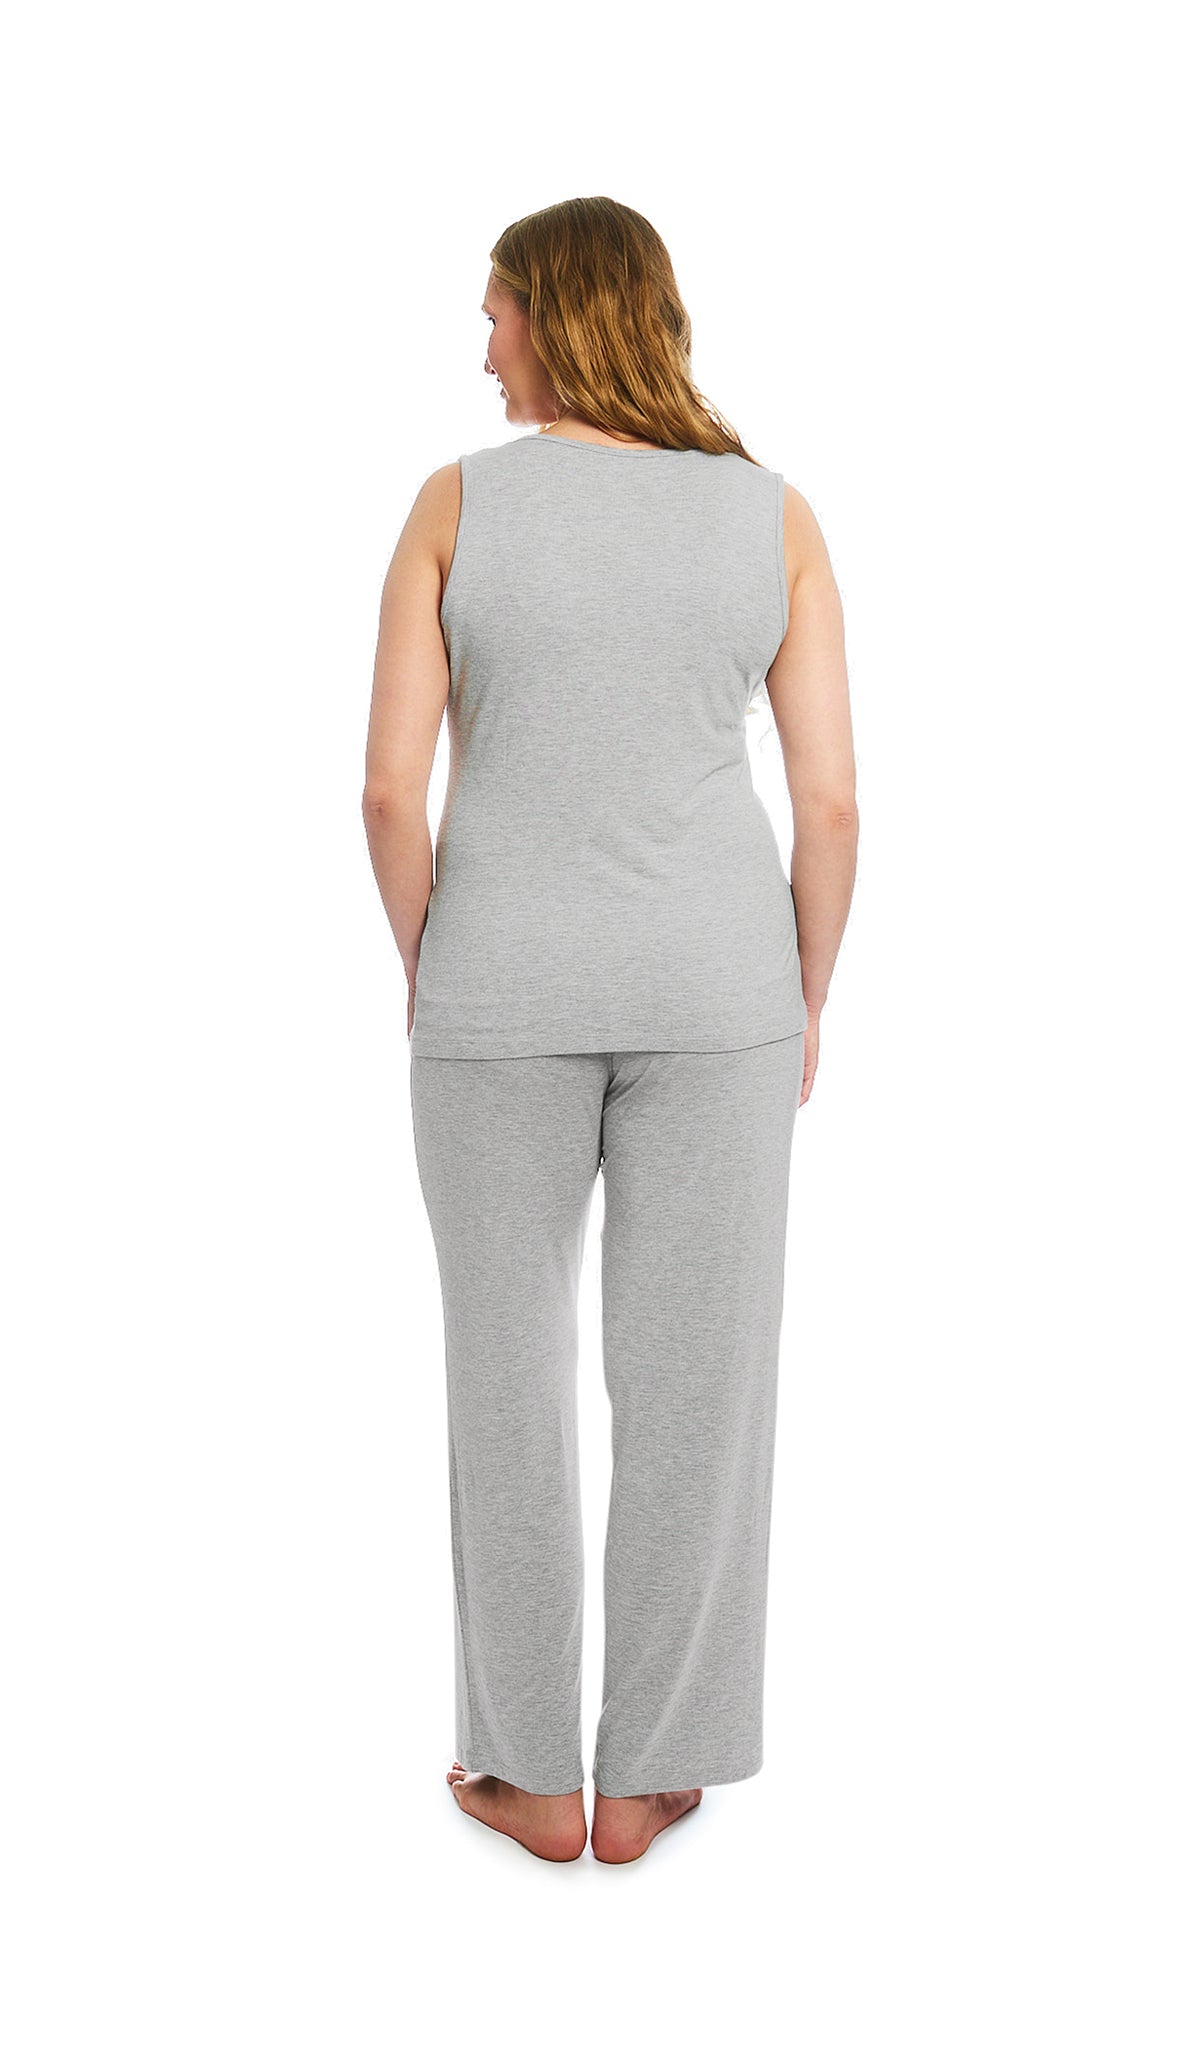 Heather Grey Solid Analise 3-Piece Set, back shot of woman wearing tank top and pant.